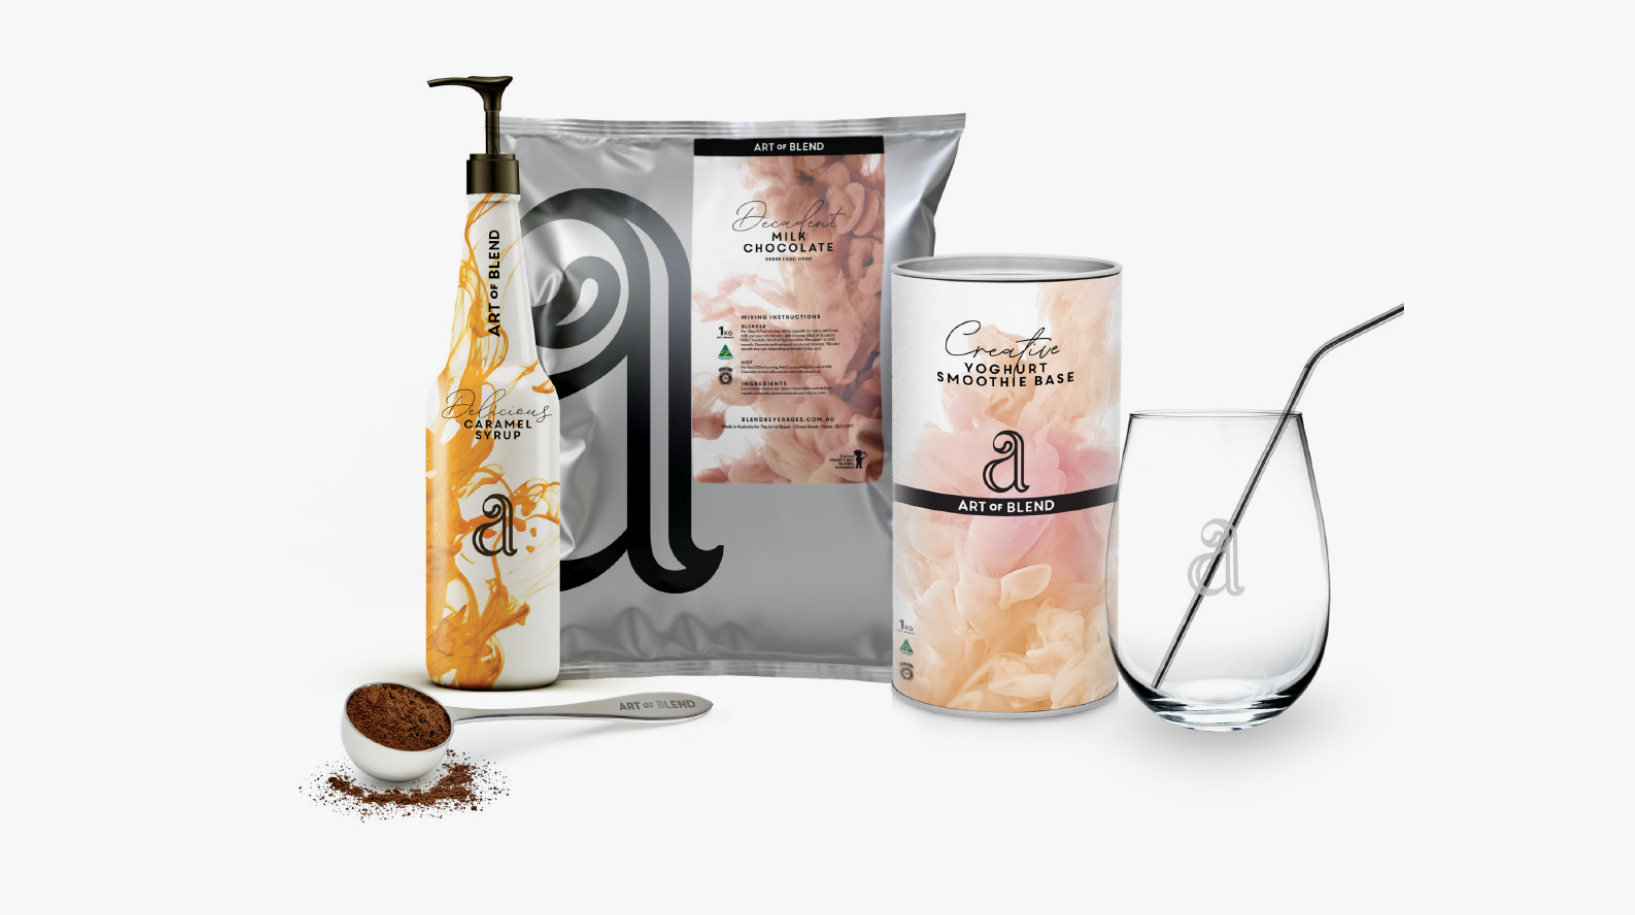 A setup of Art of Blend packaging featuring a caramel syrup bottle, a milk chocolate drink mix pack, a yogurt smoothie base bag, a cup, and a scooper.